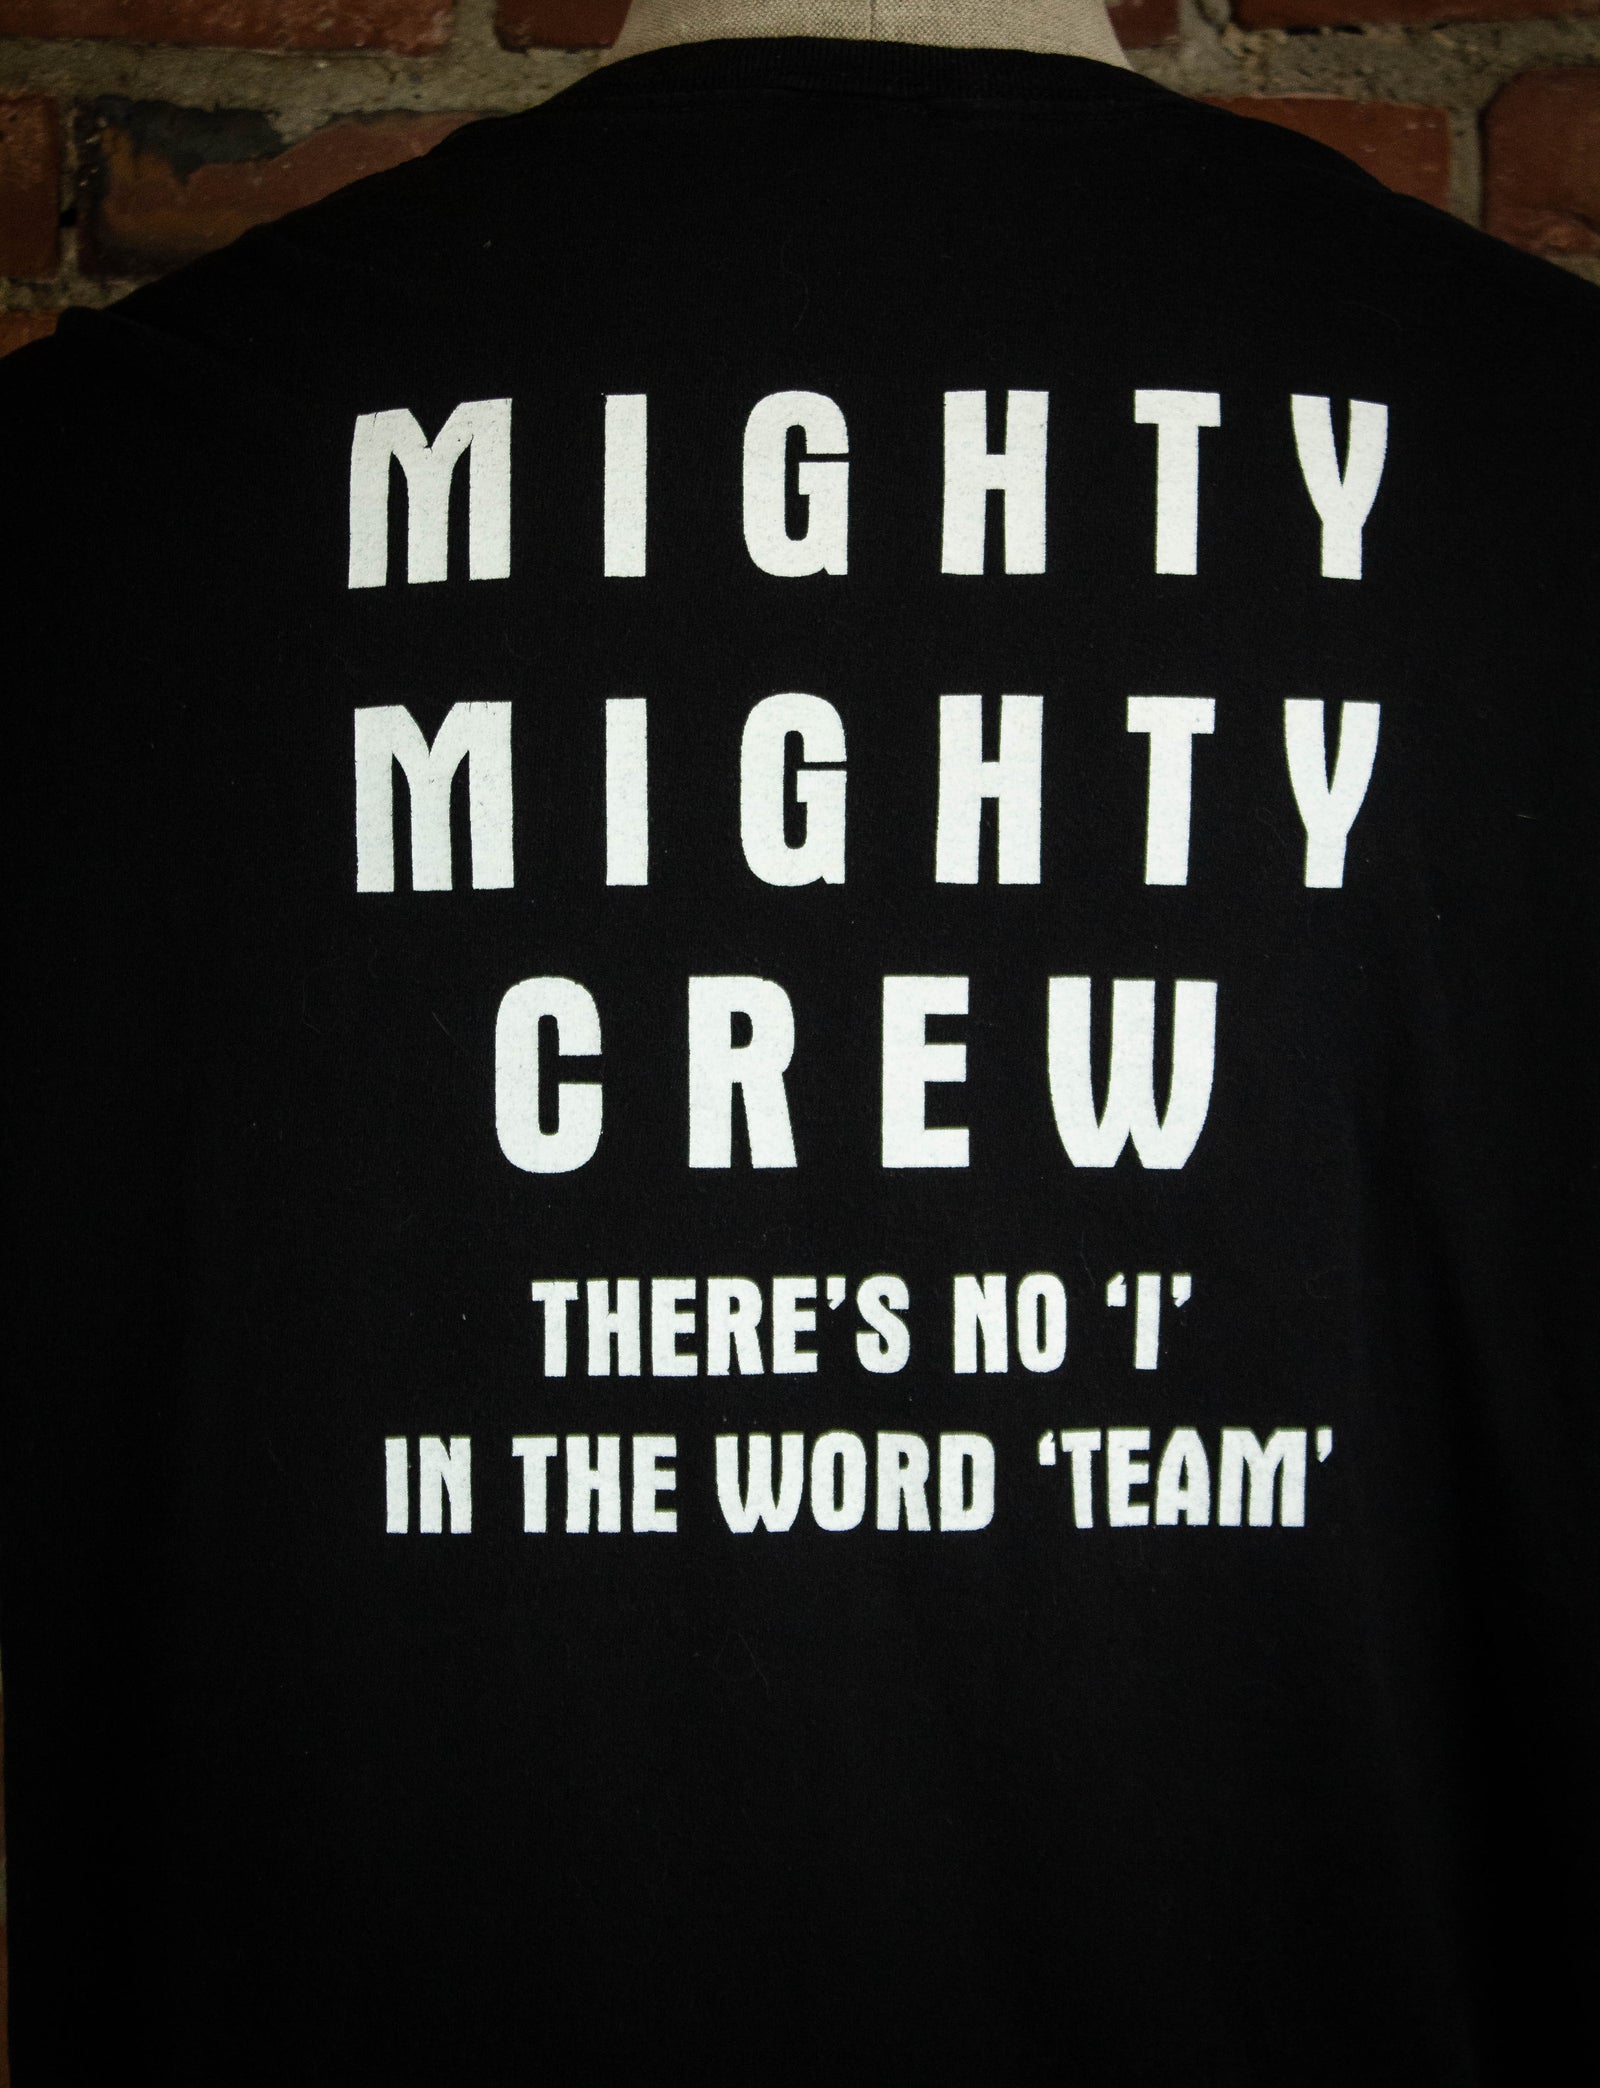 Vintage 1995 The Mighty Mighty Bosstones Mighty, Mighty Crew T Shirt Unisex XL